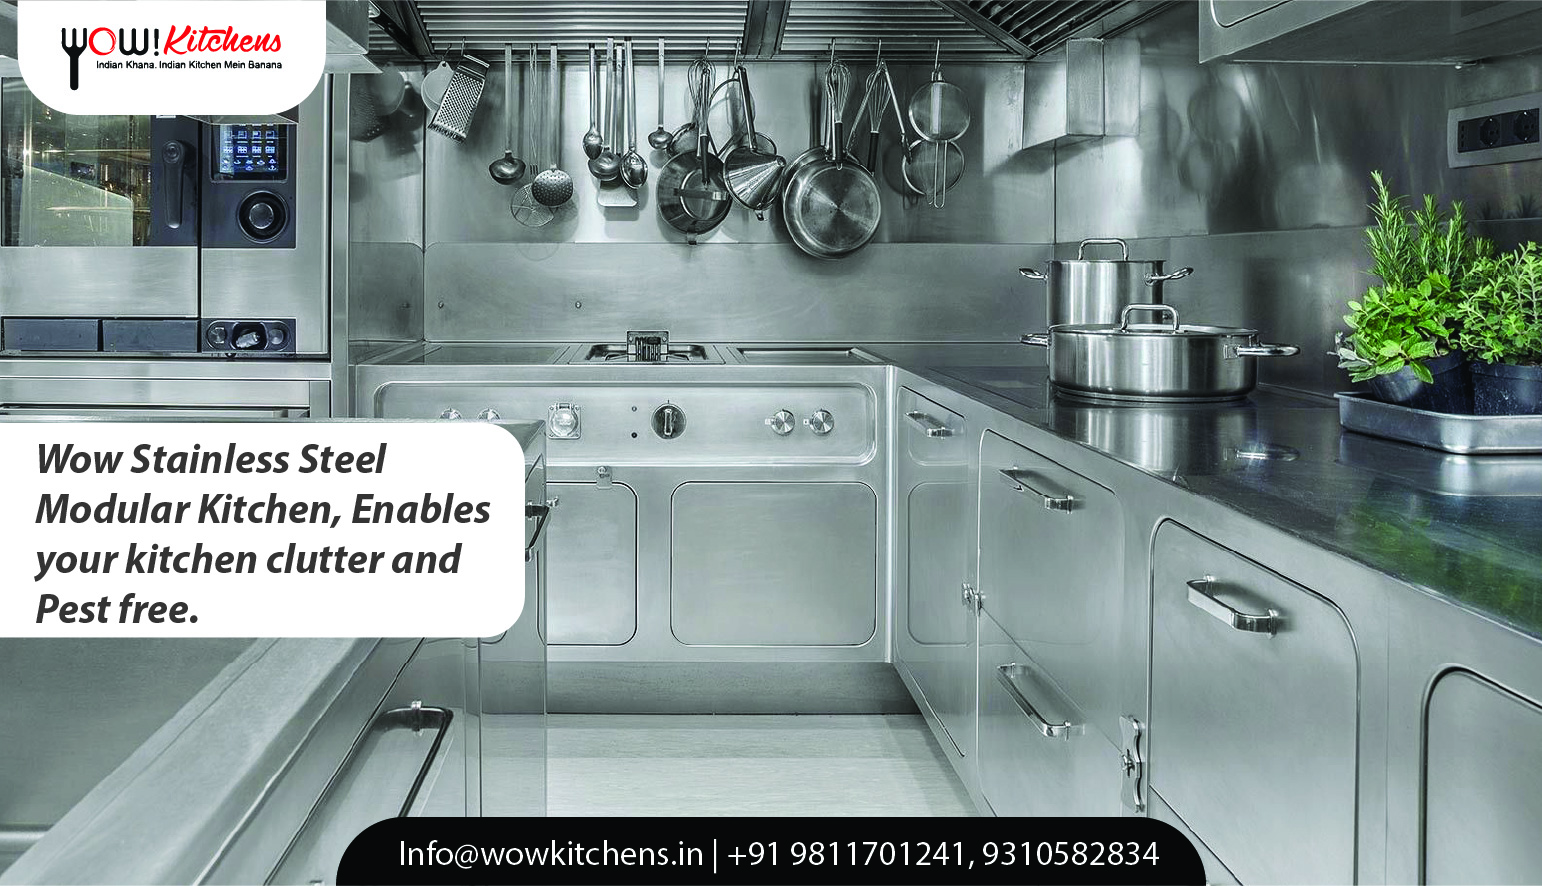 Wow Stainless Steel Modular Kitchen, Enables your kitchen clutter and Pest free